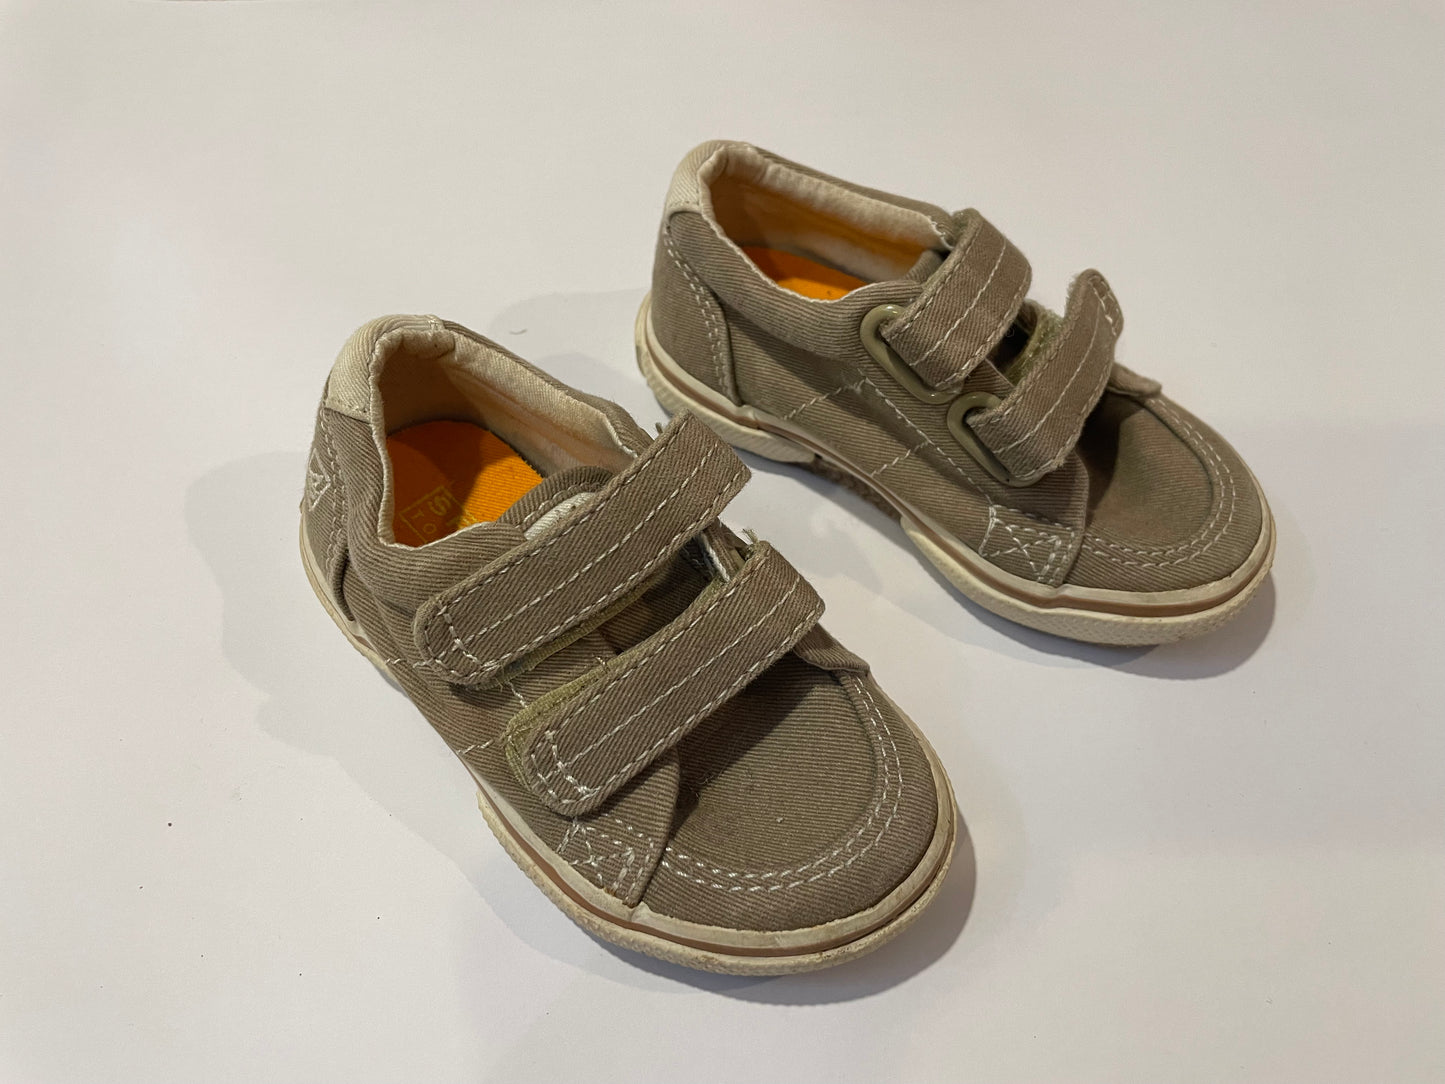 Sperry Top Sider Boys Shoes Size 6 GUC